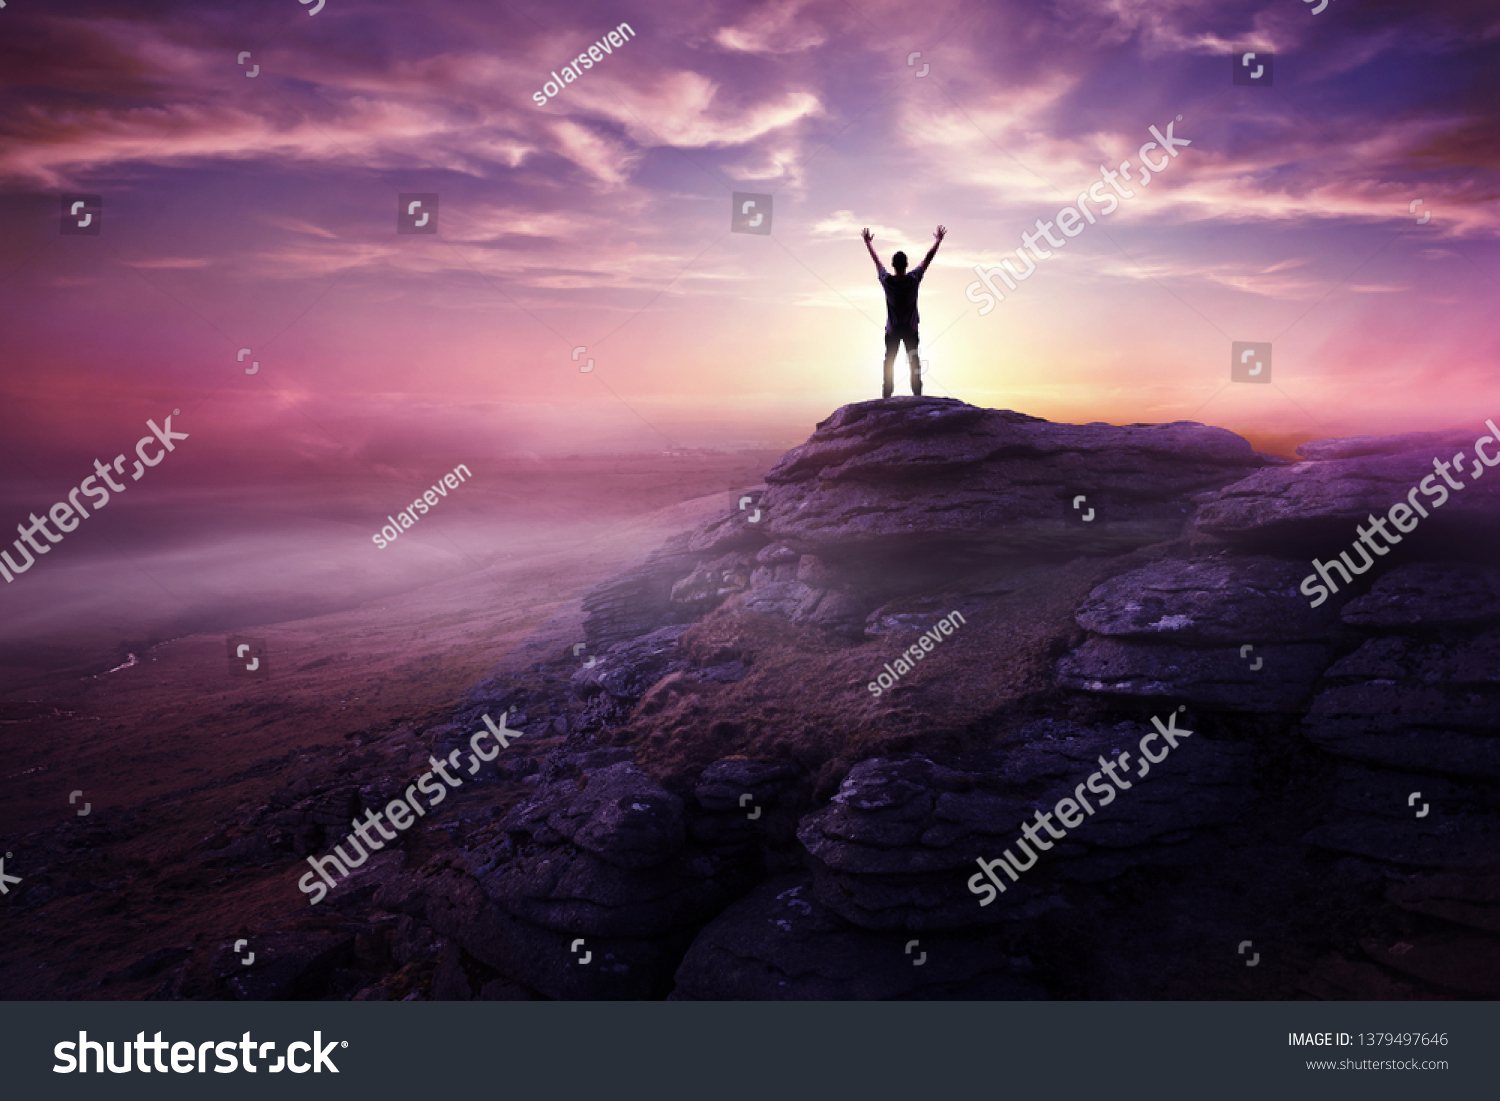 A man expressing freedom by reaching up to the sky as the sun sets in the distance. Hopes and dreams photo composite. #1379497646